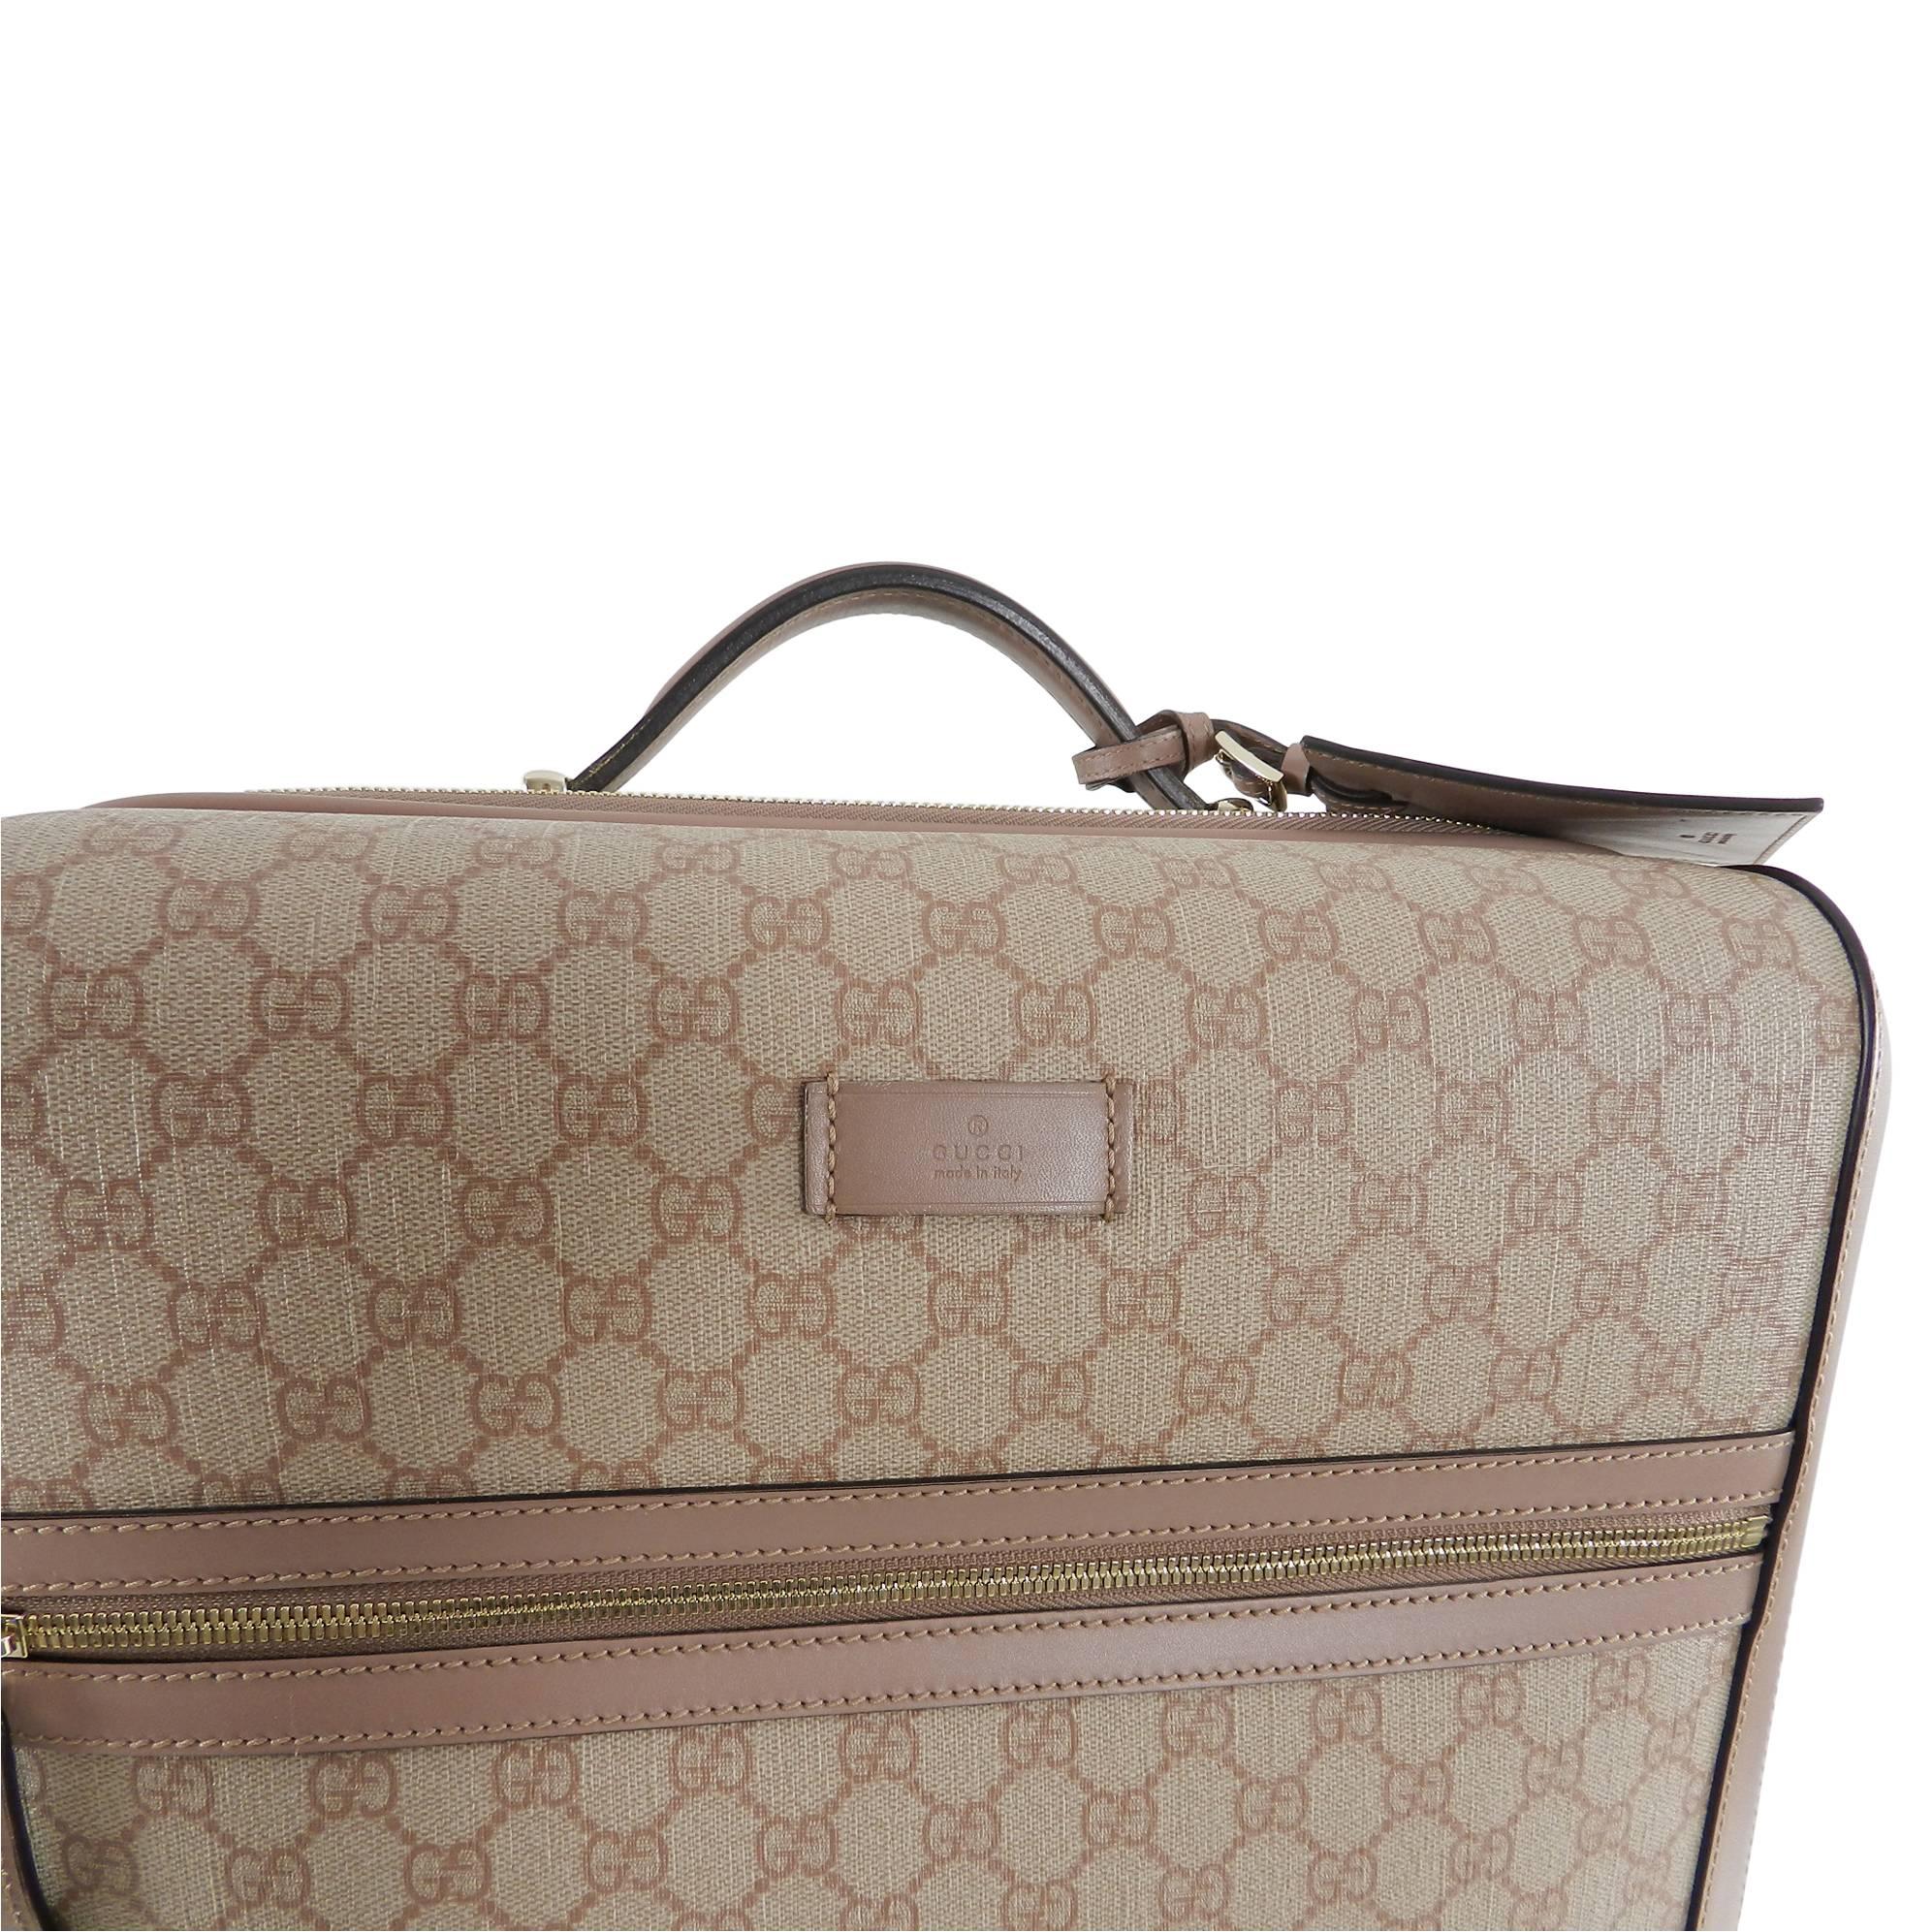 Brown Gucci GG Supreme Monogram 4 Wheel Carry-on Luggage - Winter Rose